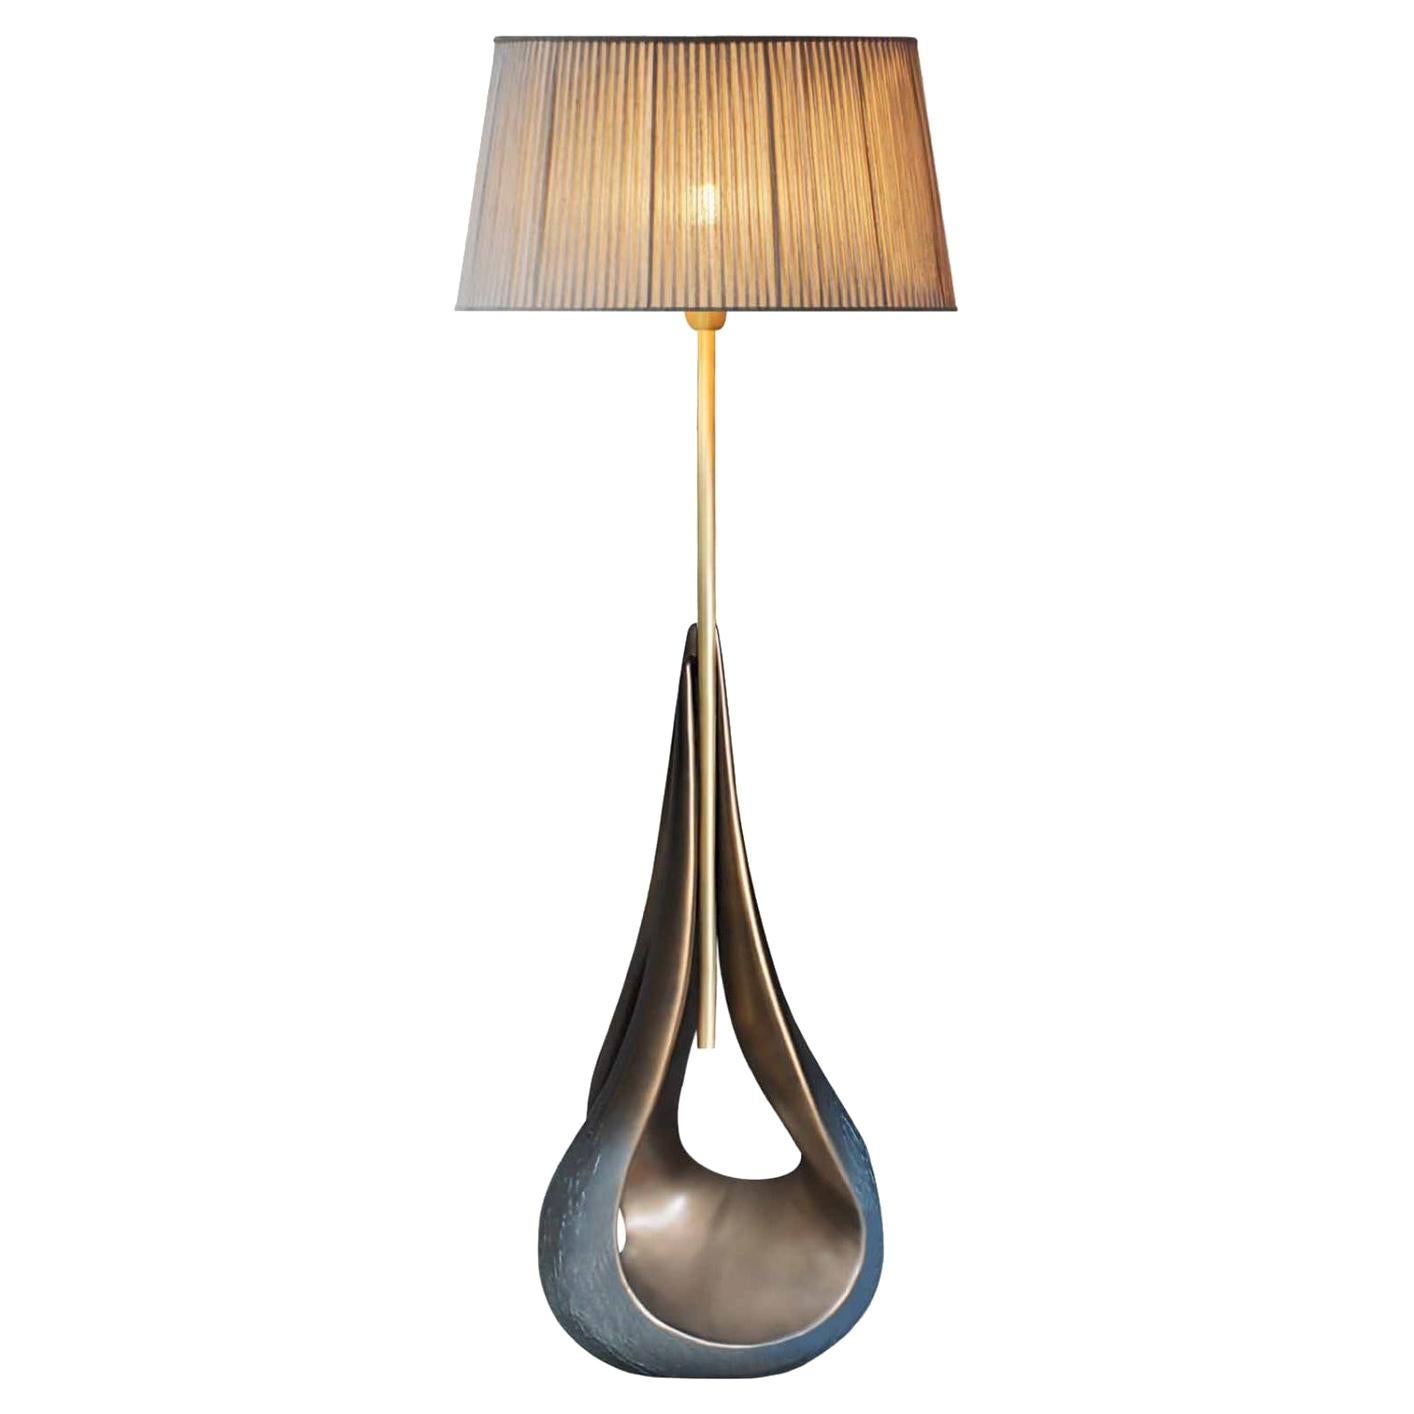 New Floor Lamp in Resin finished in Brass Color For Sale